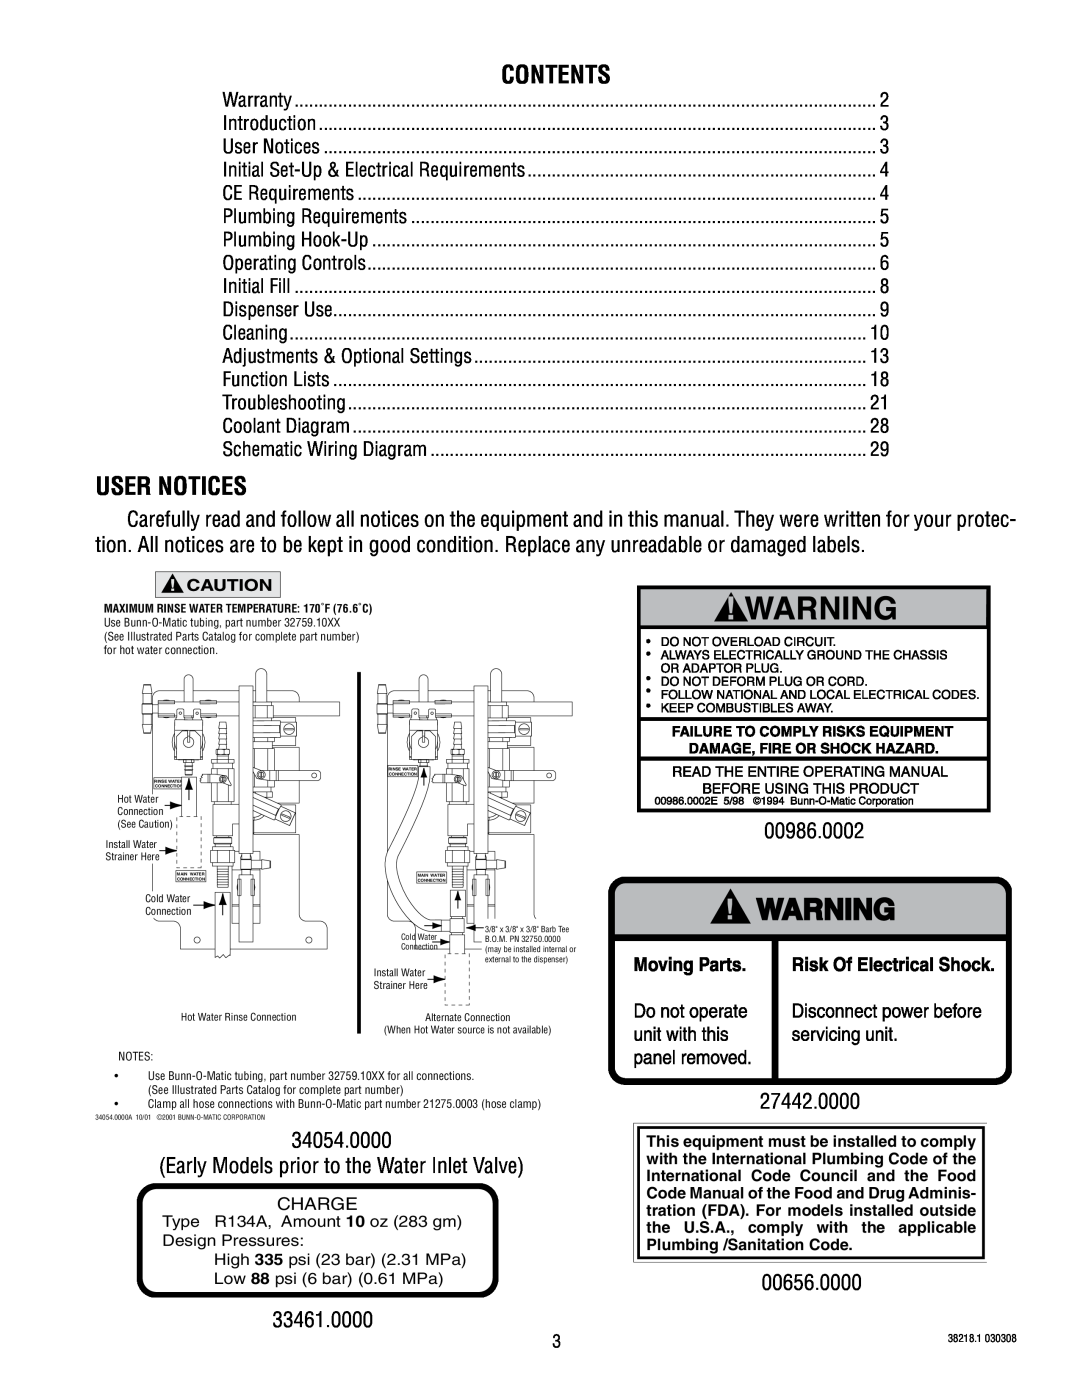 Bunn S/N 0005473 & UP Contents, User Notices, 00986.0002, 27442.0000, Early Models prior to the Water Inlet Valve, Charge 